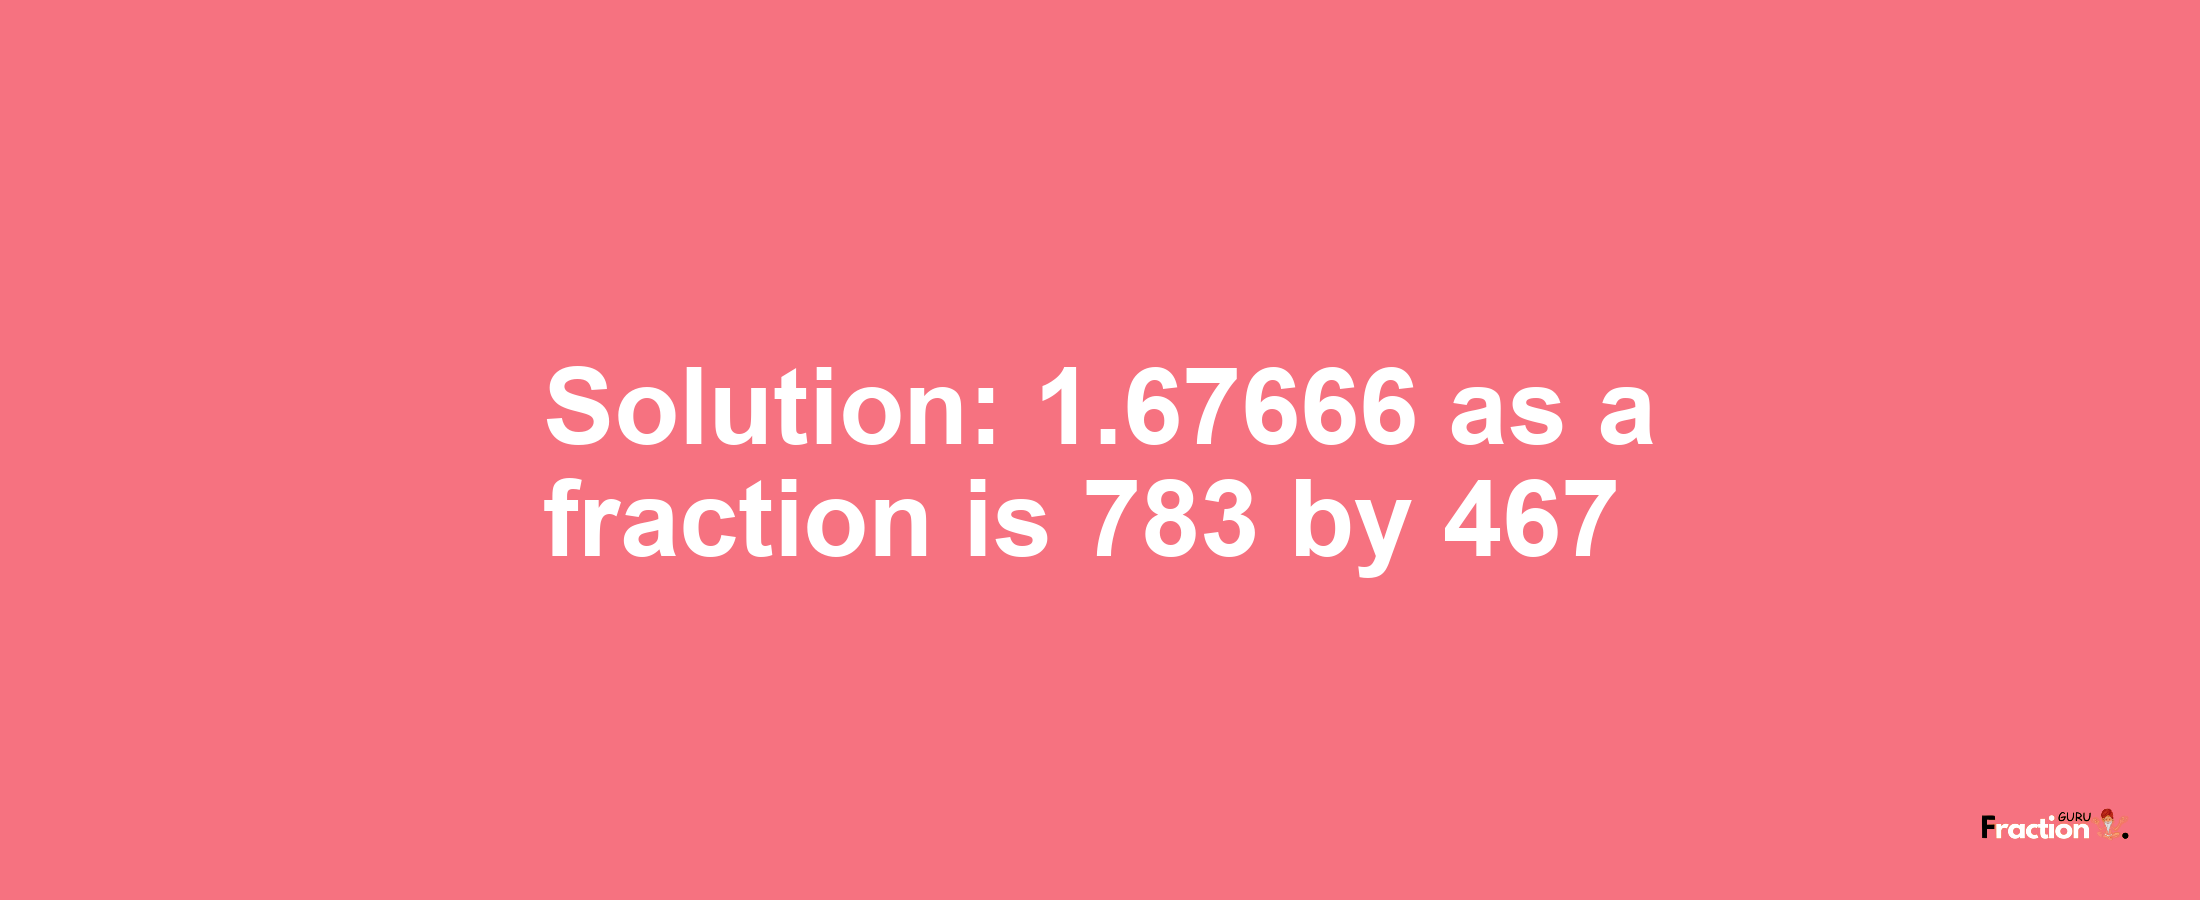 Solution:1.67666 as a fraction is 783/467